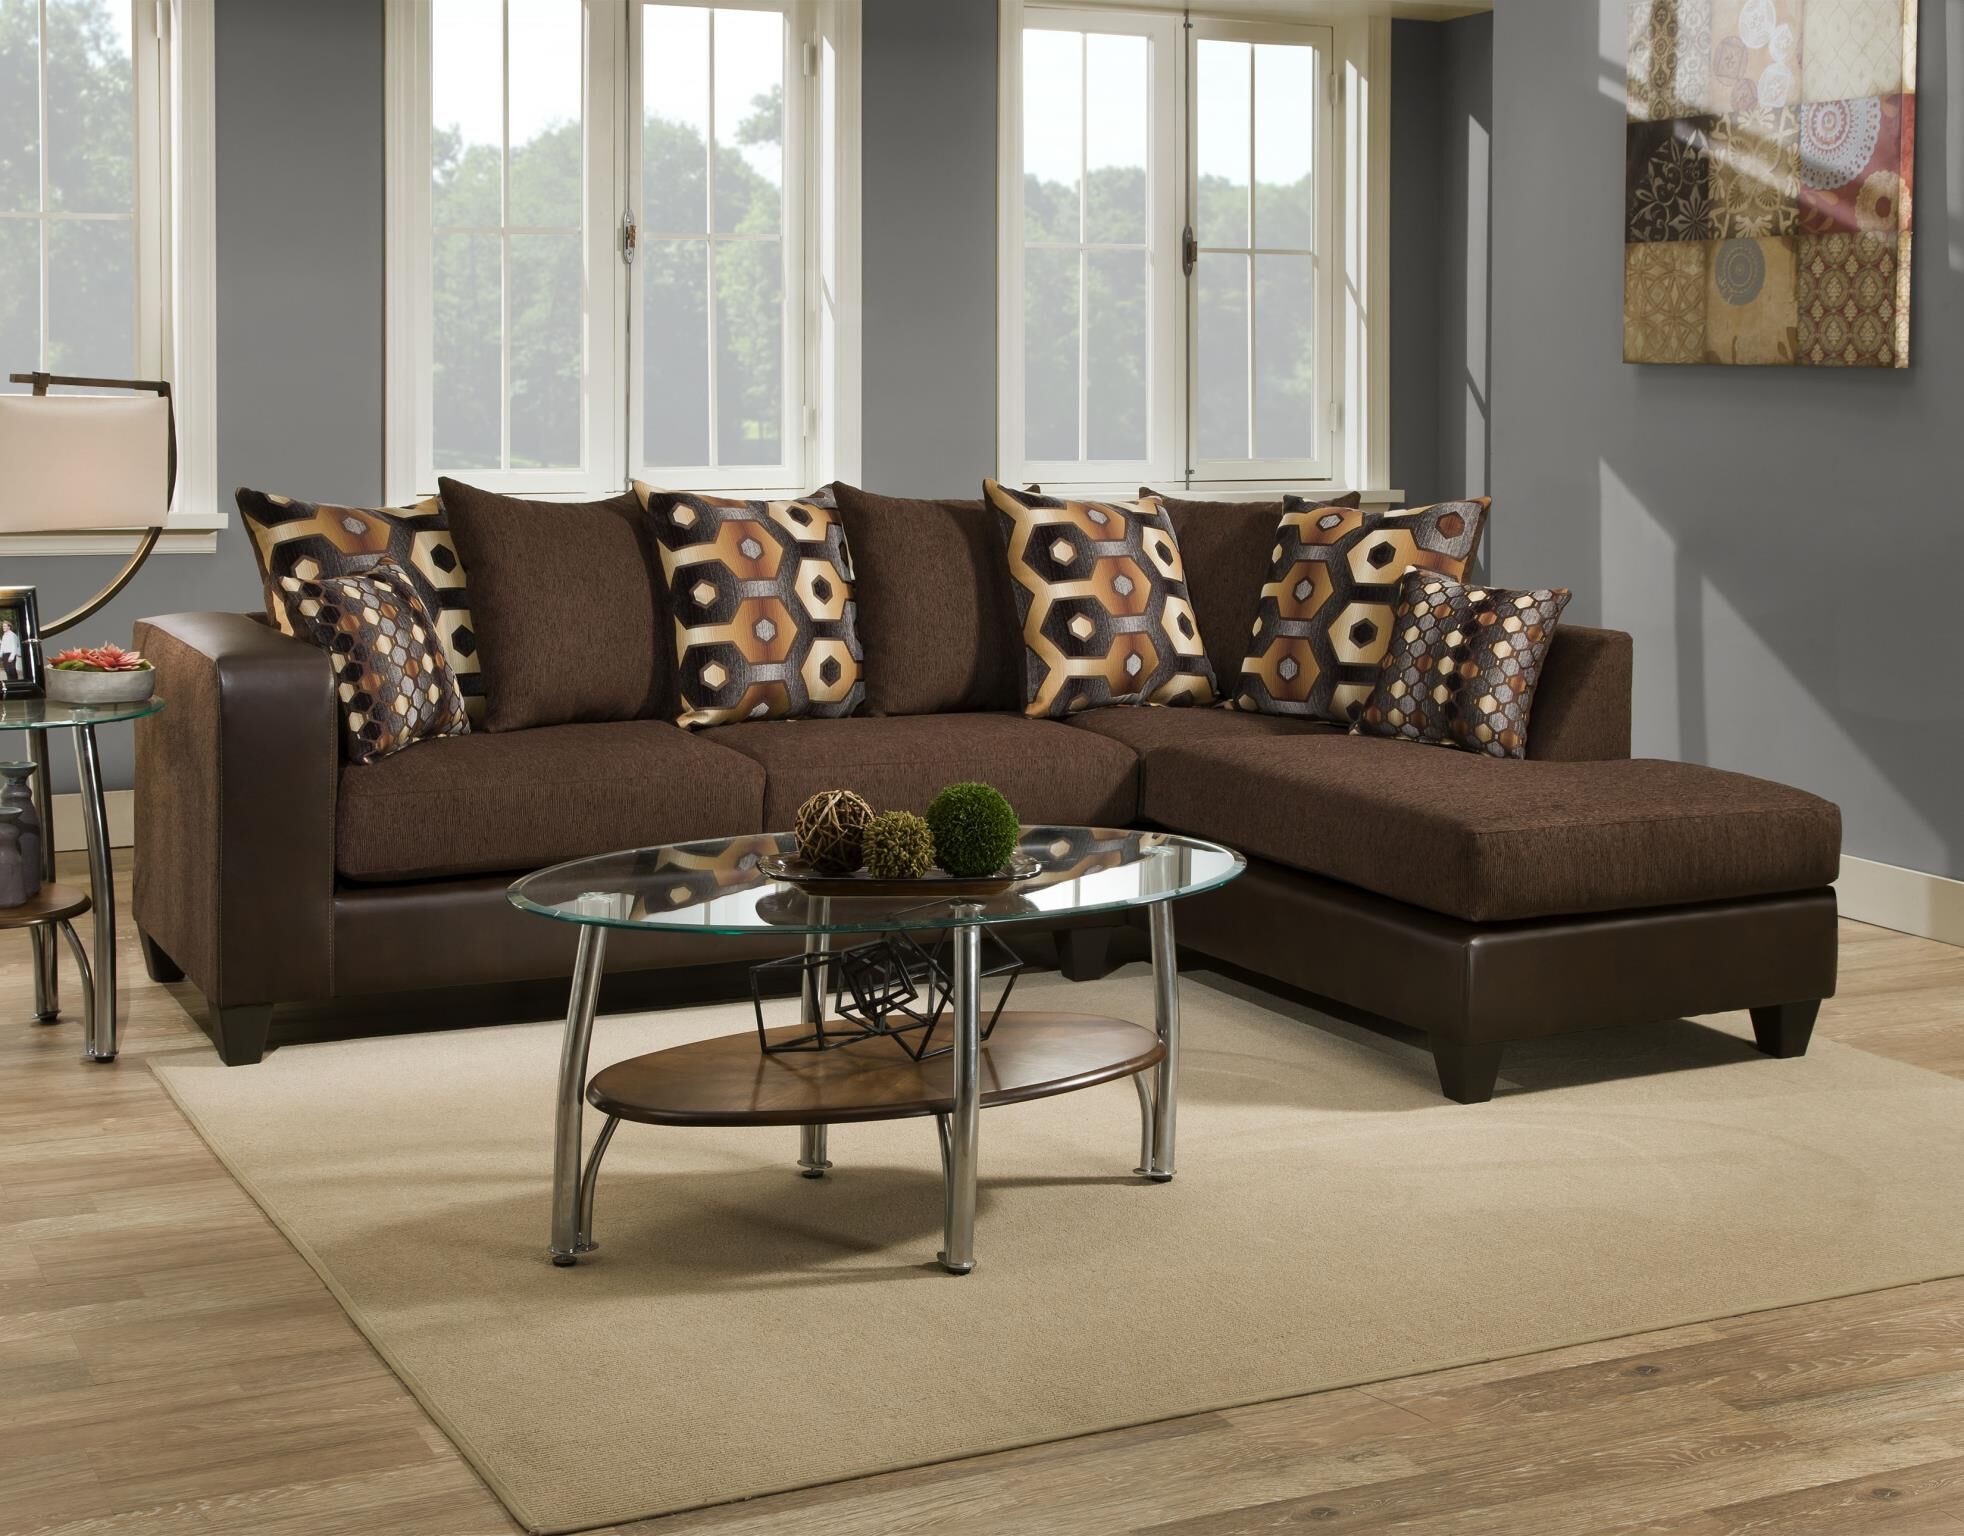 110" X 73" X 37" Cougar Chocolate Cowgirl Brown 100% Polyester Sectional